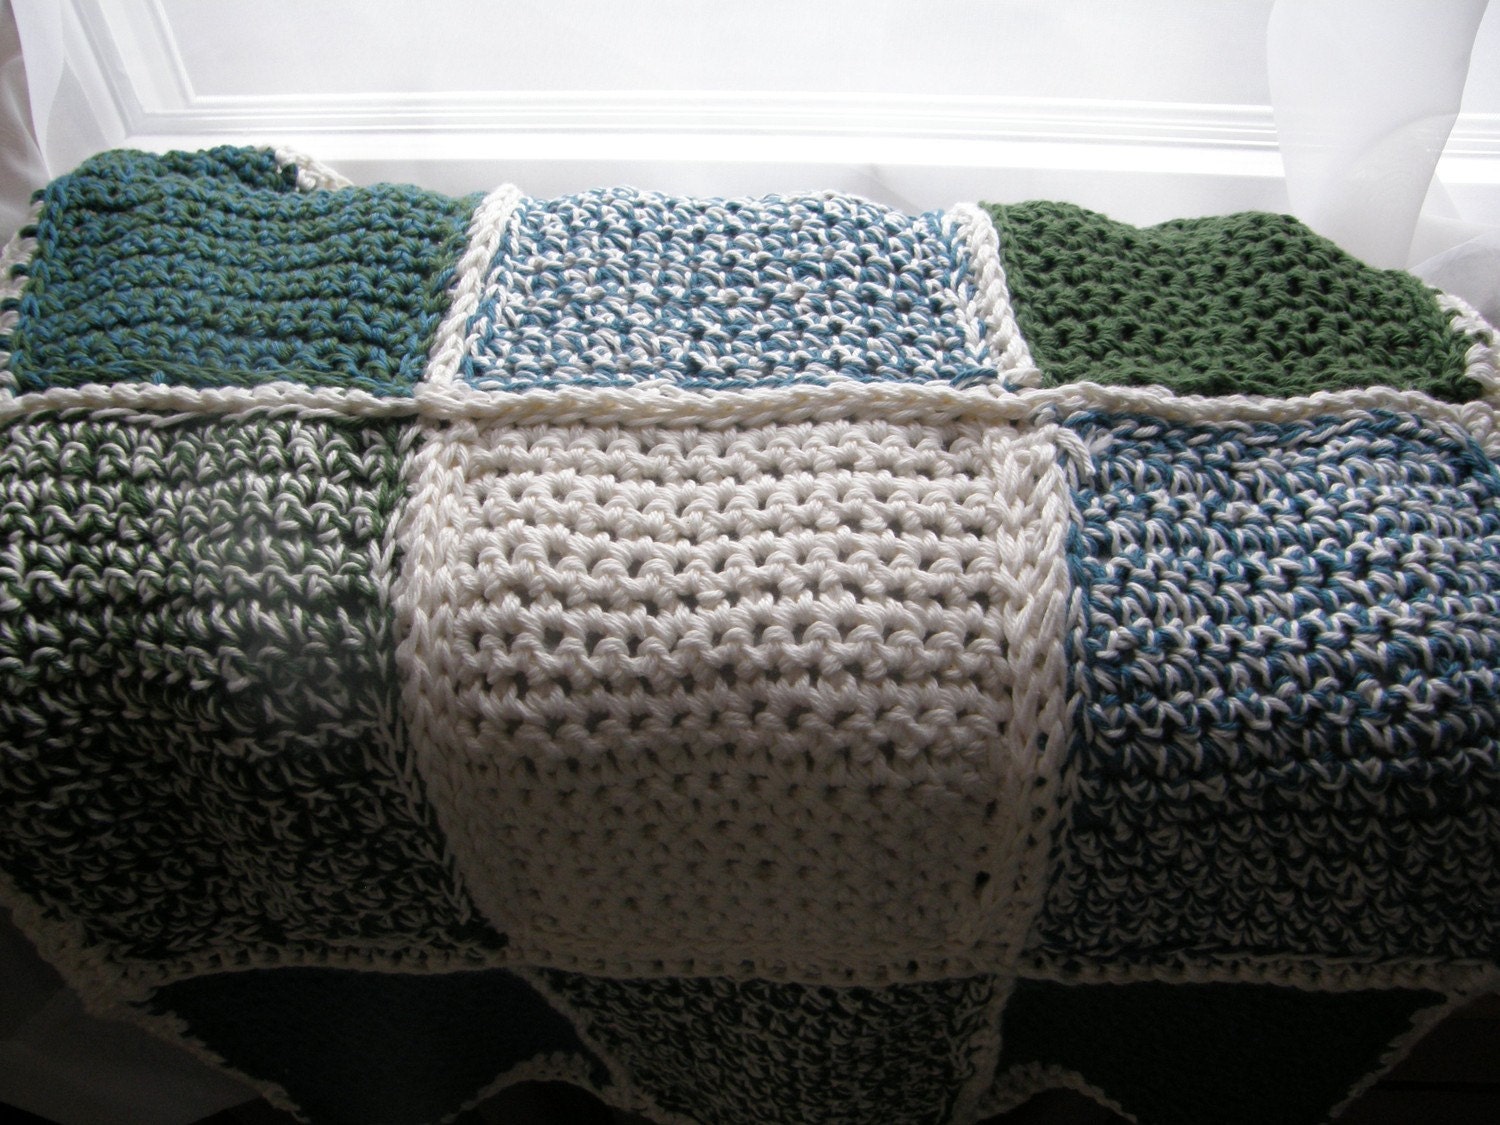 Snuggly Baby Blanket--Crochet Cotton Squares--Blue/Green/Soft White